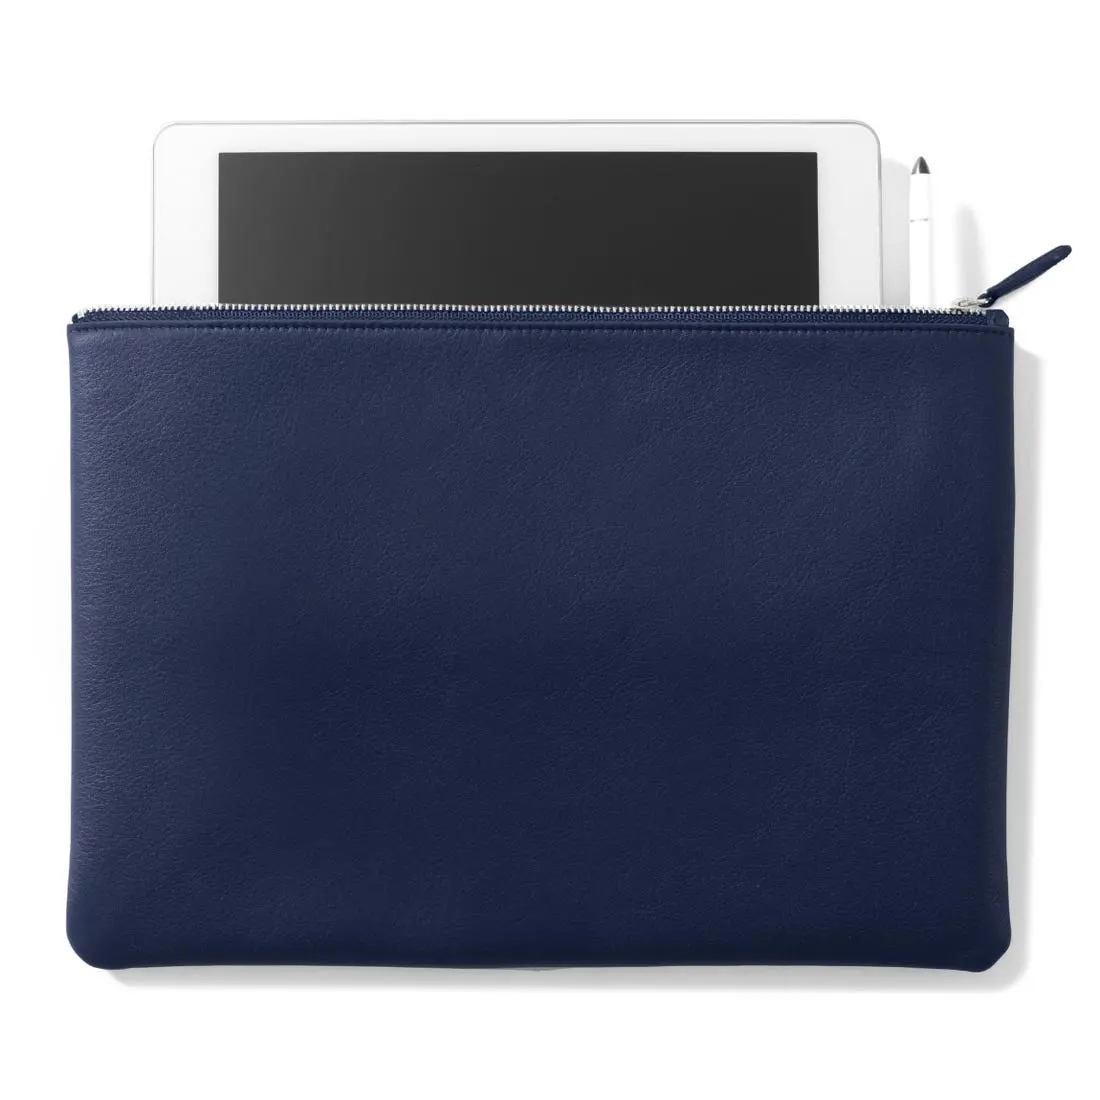 Wholesales Document Bag PU Leather Zipper Clutch Bag Laptop Sleeve Pouch Custom For Ipad Air 5